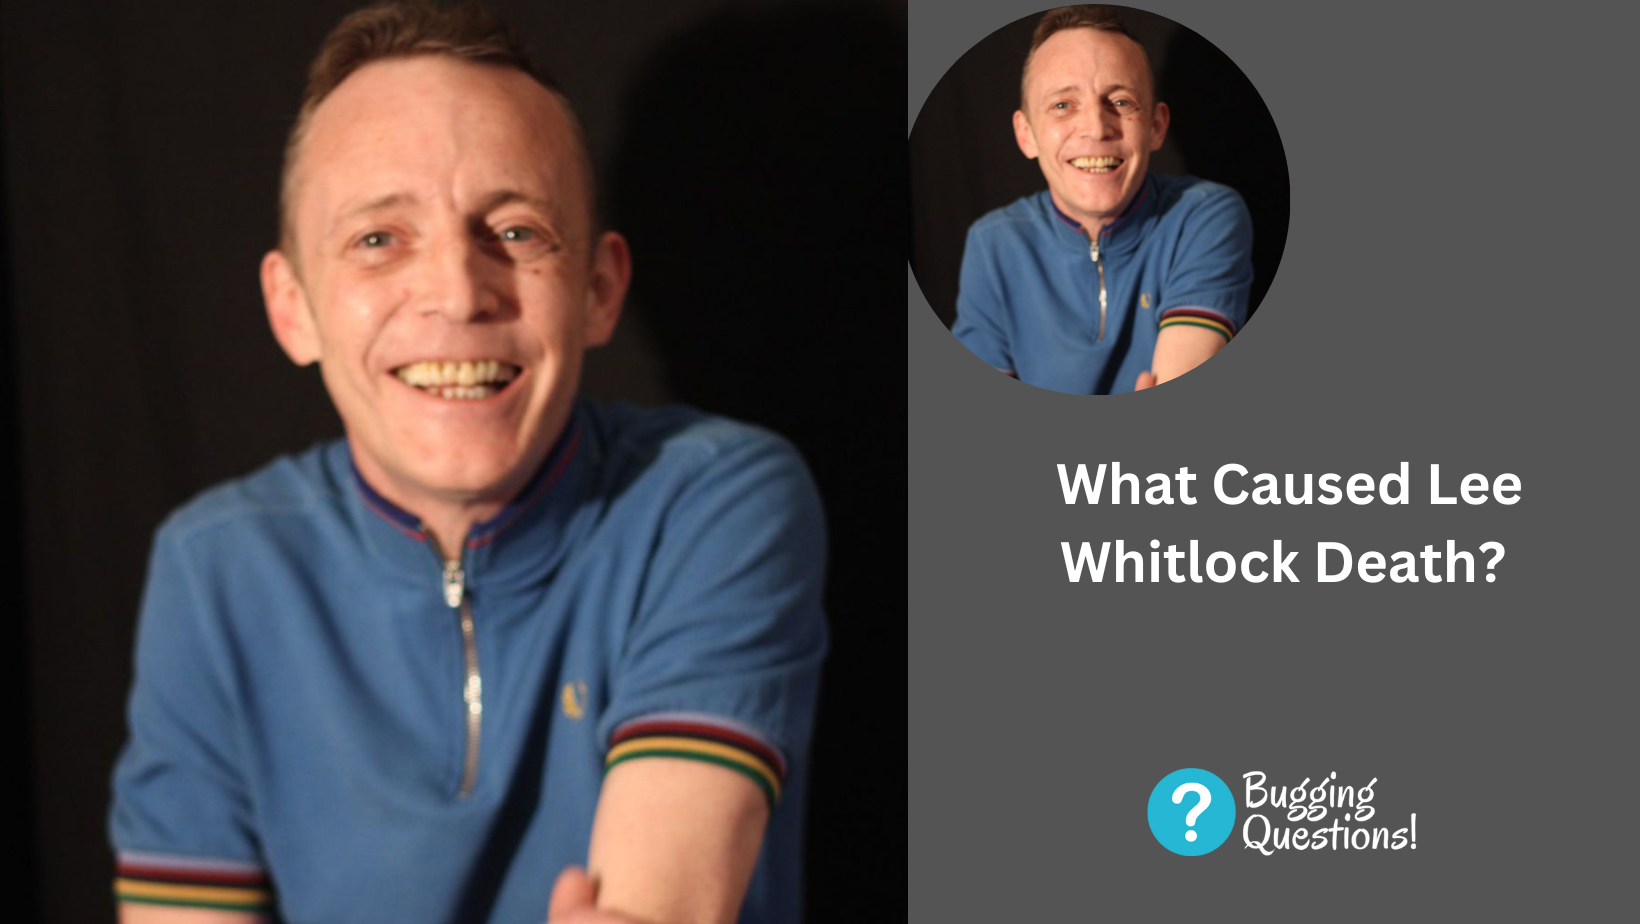 What Caused Lee Whitlock Death?